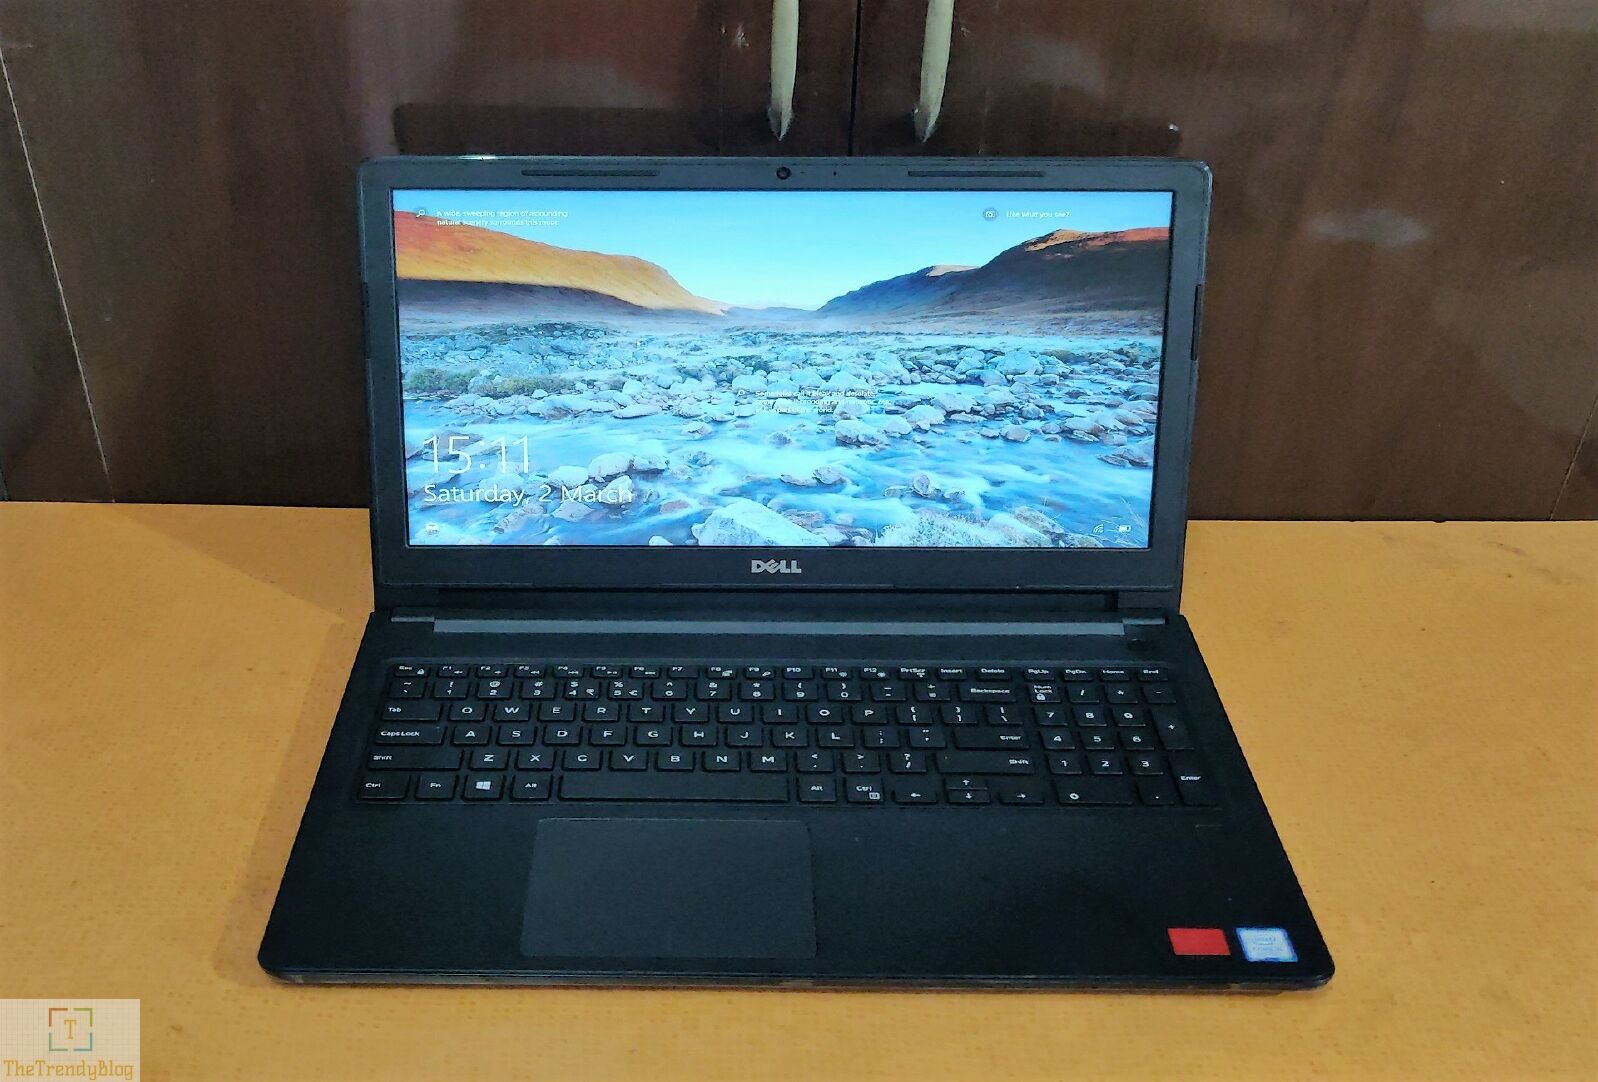 DELL Vostro 3578 Laptop with Finger Print Scanner Review ! - The Trendy Blog